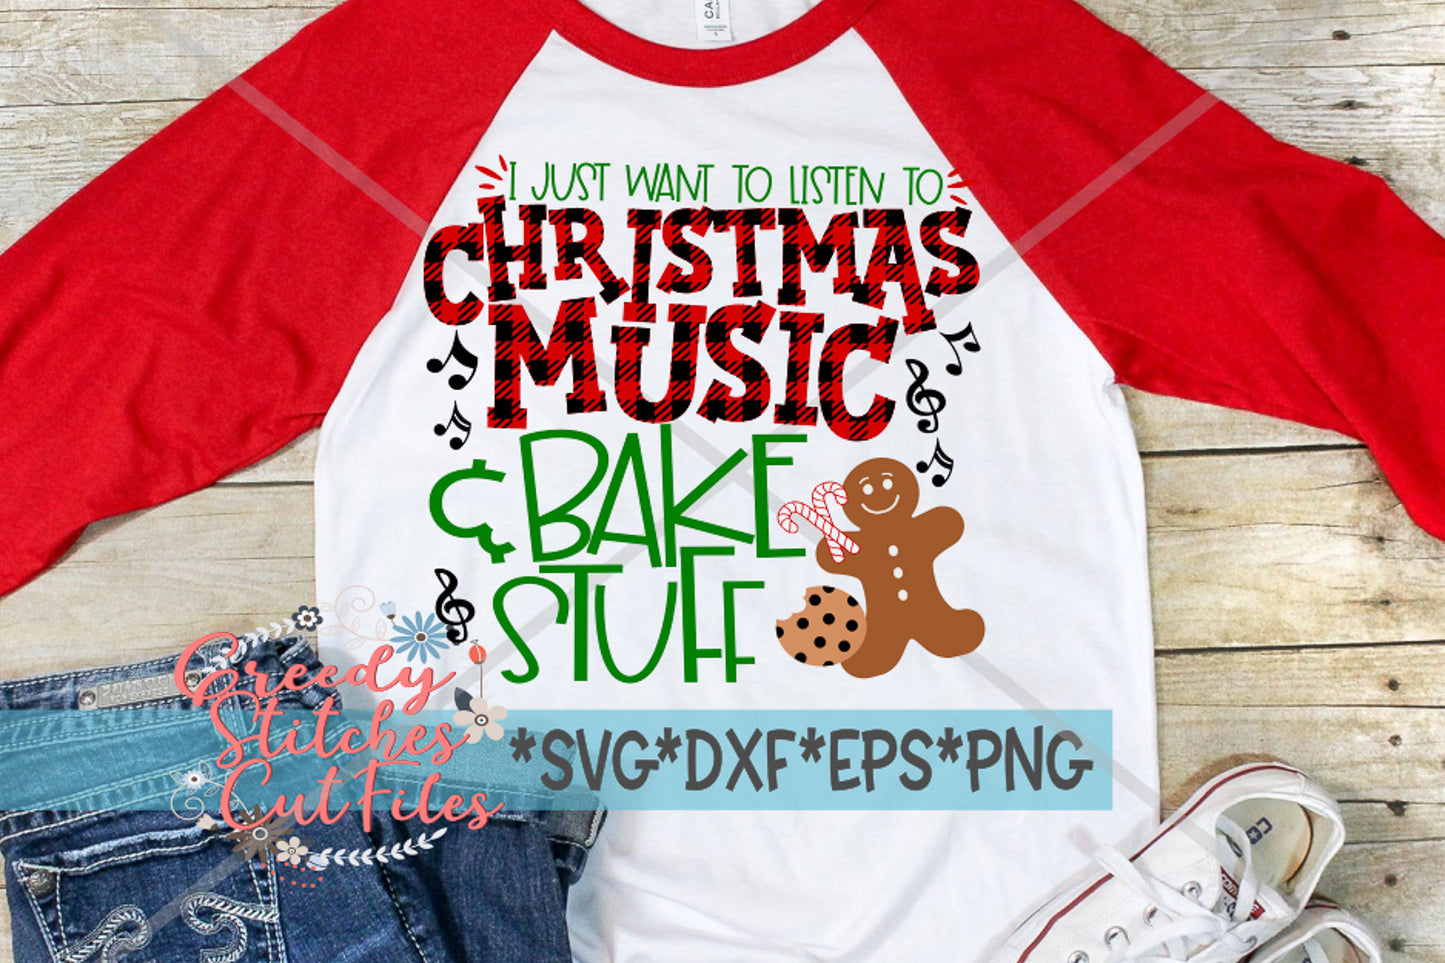 I Just Want To Listen To Christmas Music & Bake Stuff svg dxf eps png. Christmas SvG | Bake Stuff SvG |Instant Download Cut File